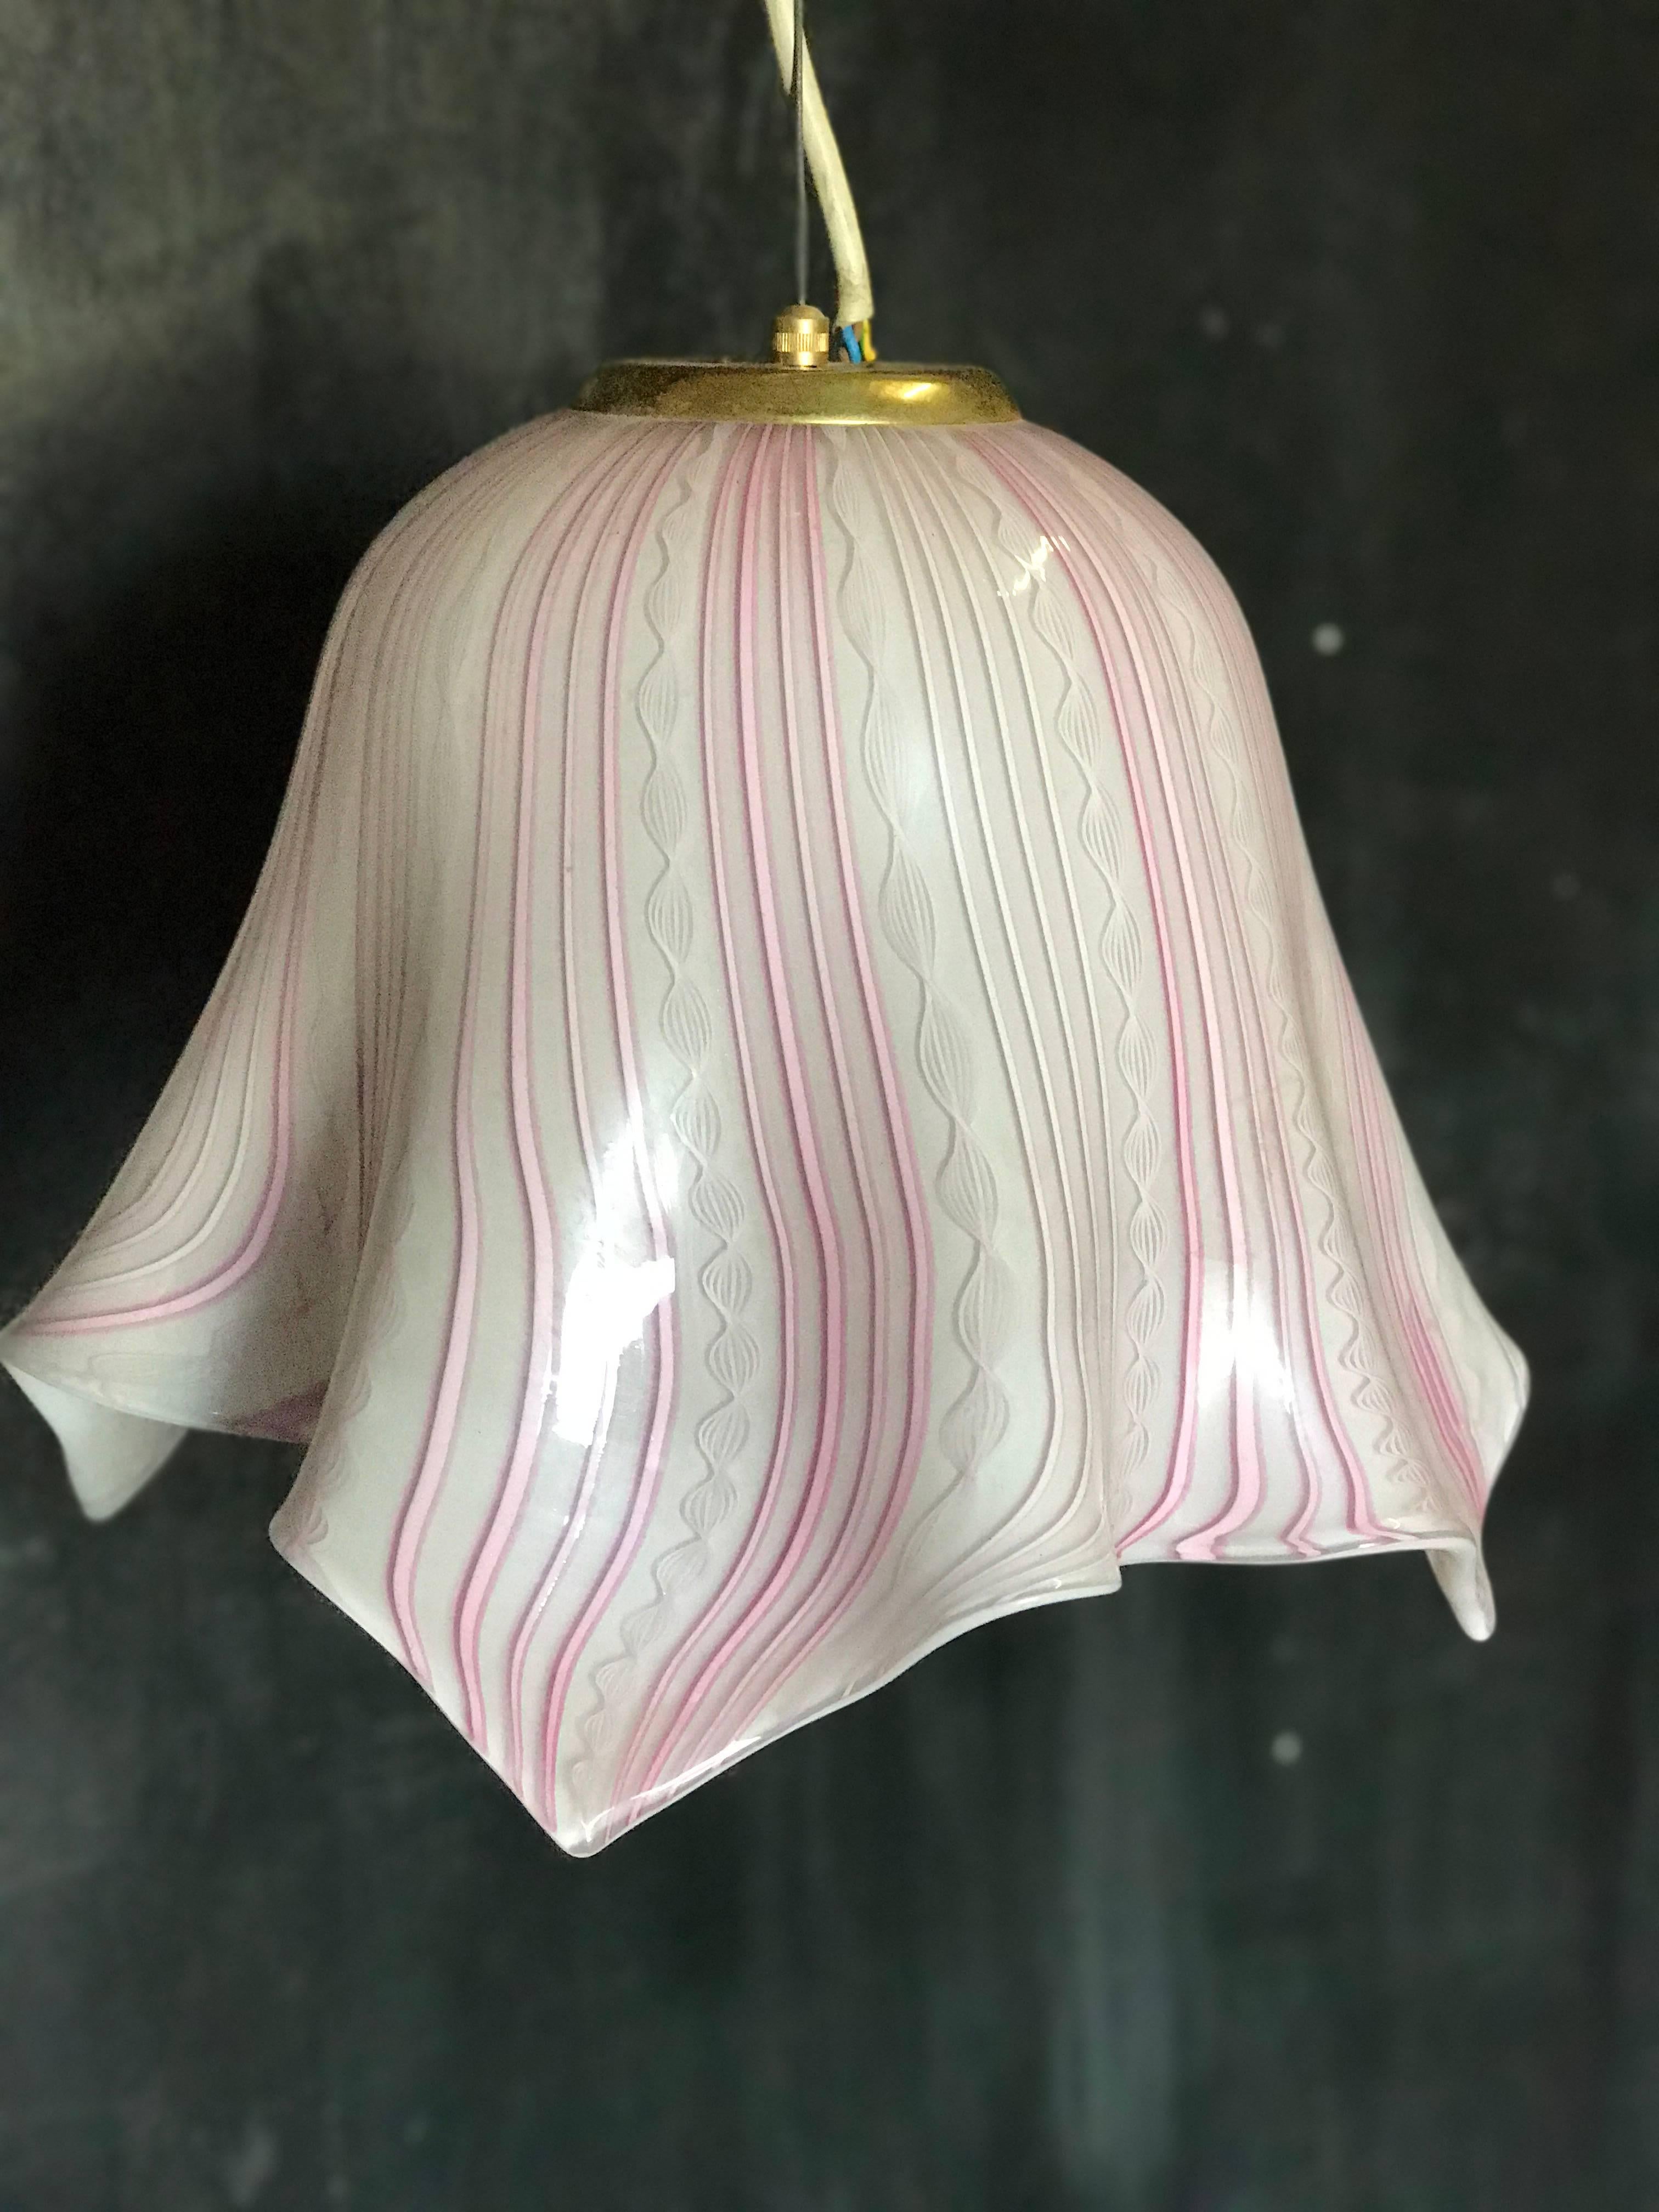 Murano pendant lighting from the 60s with unusual shape and adjustable height.